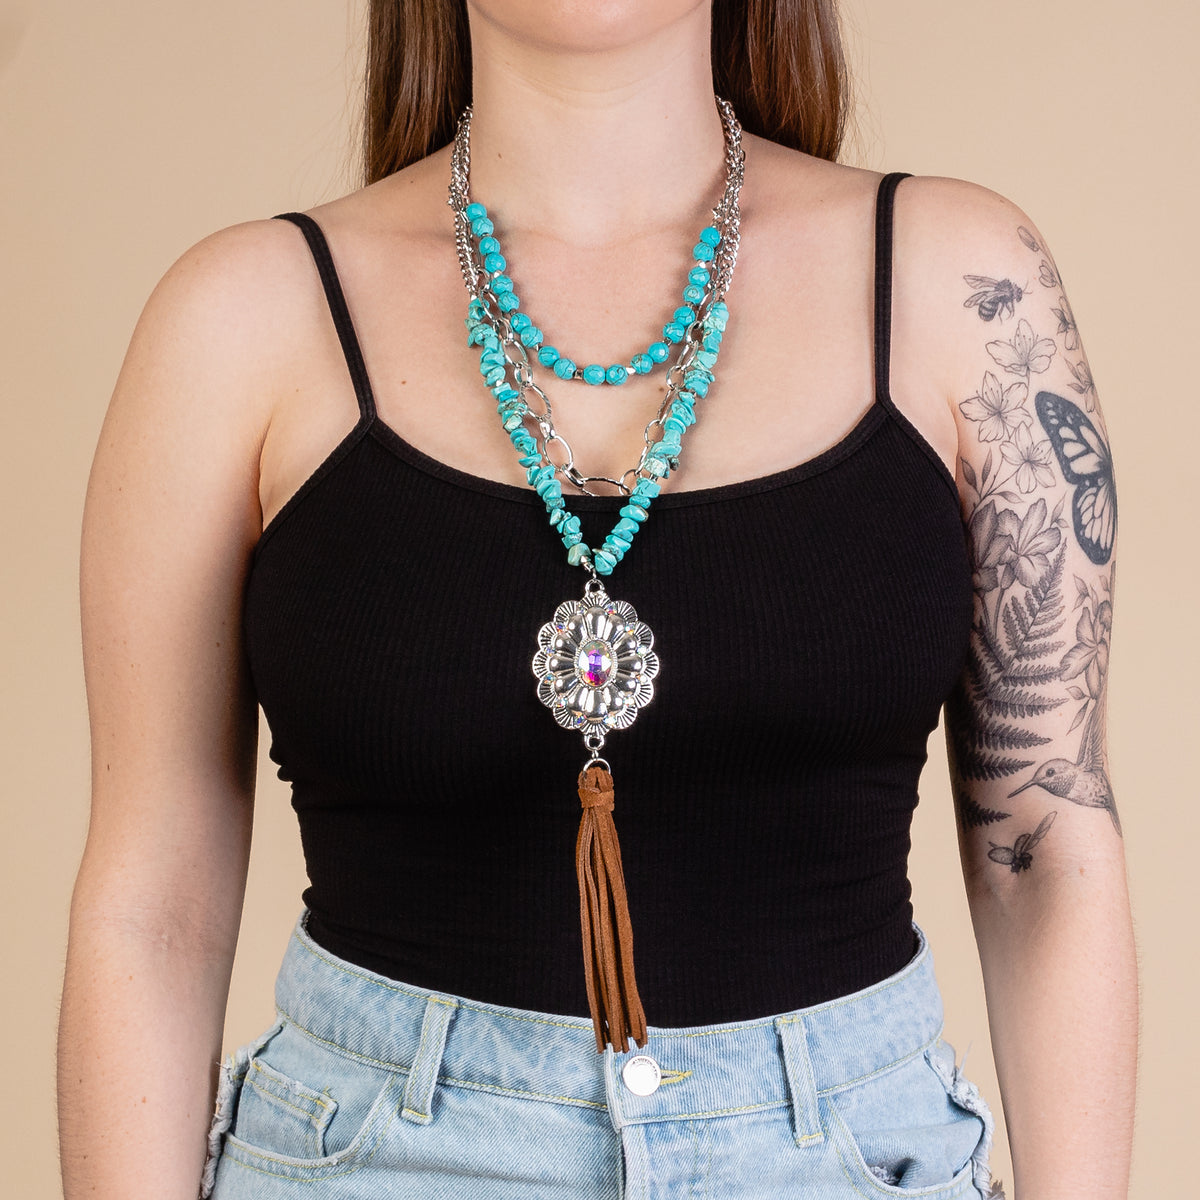 72927 - Layered Crystal Squash Blossom Necklace - Turquoise